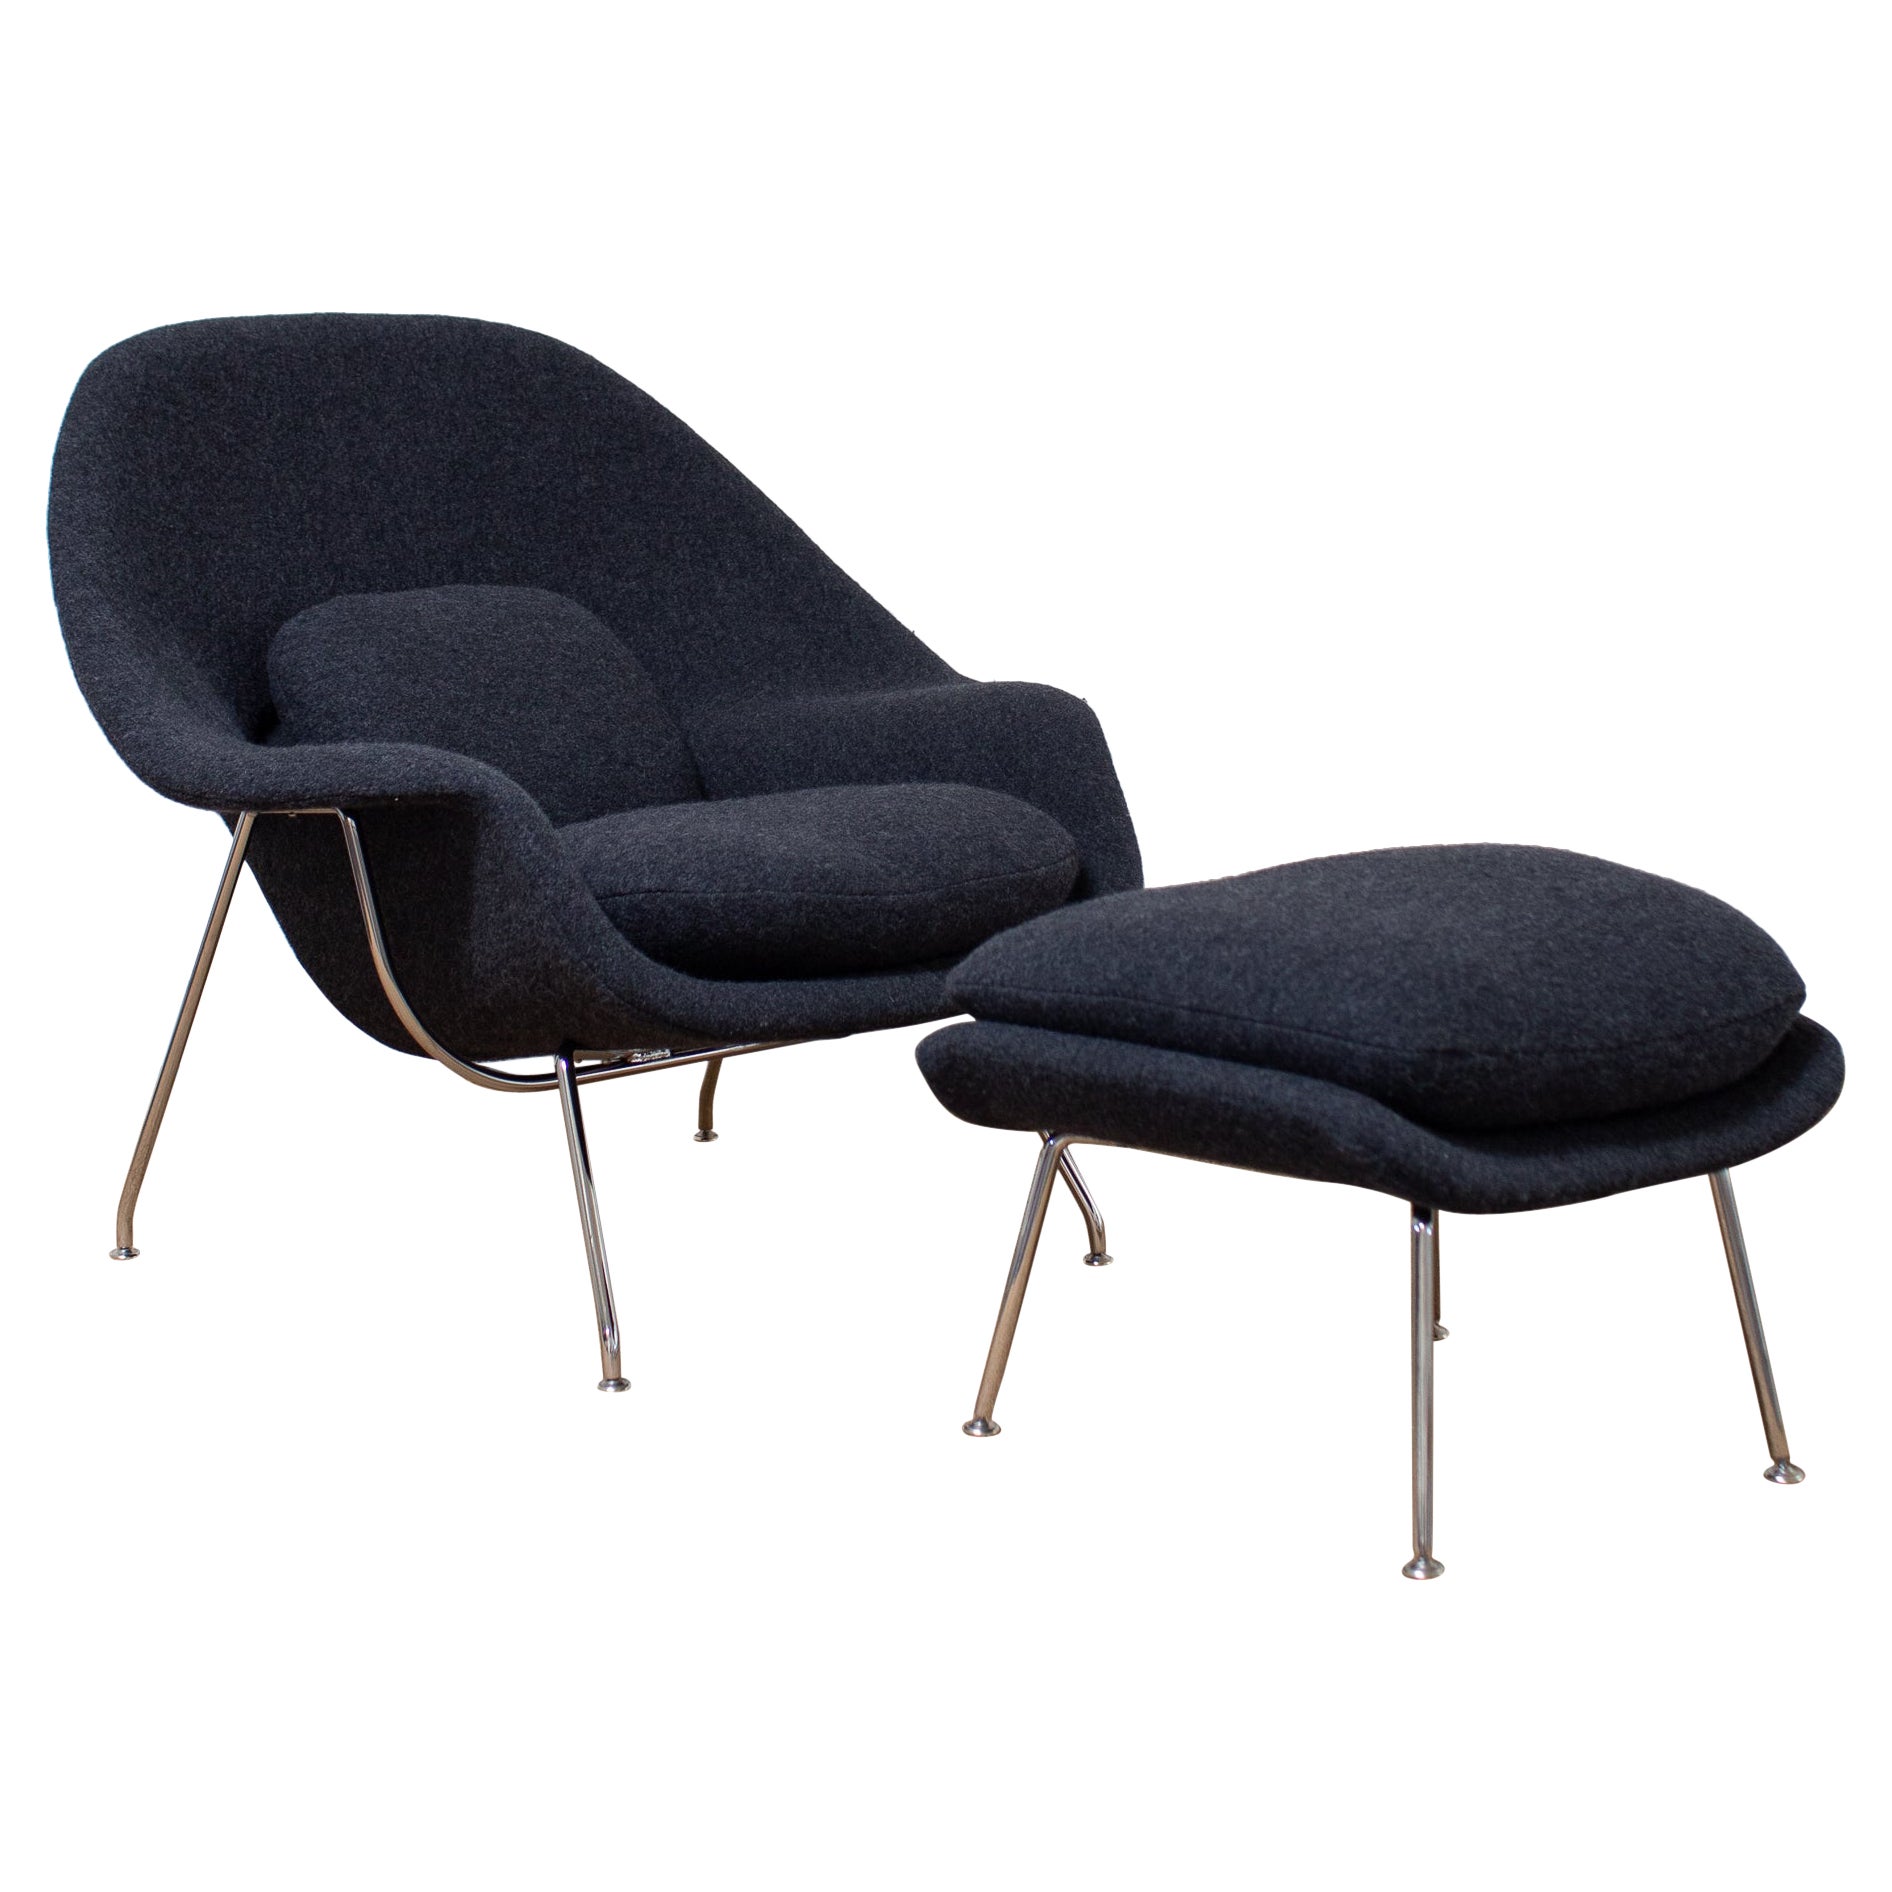 1940s Womb Chair and Ottoman by Eero Saarinen, 2 Pieces